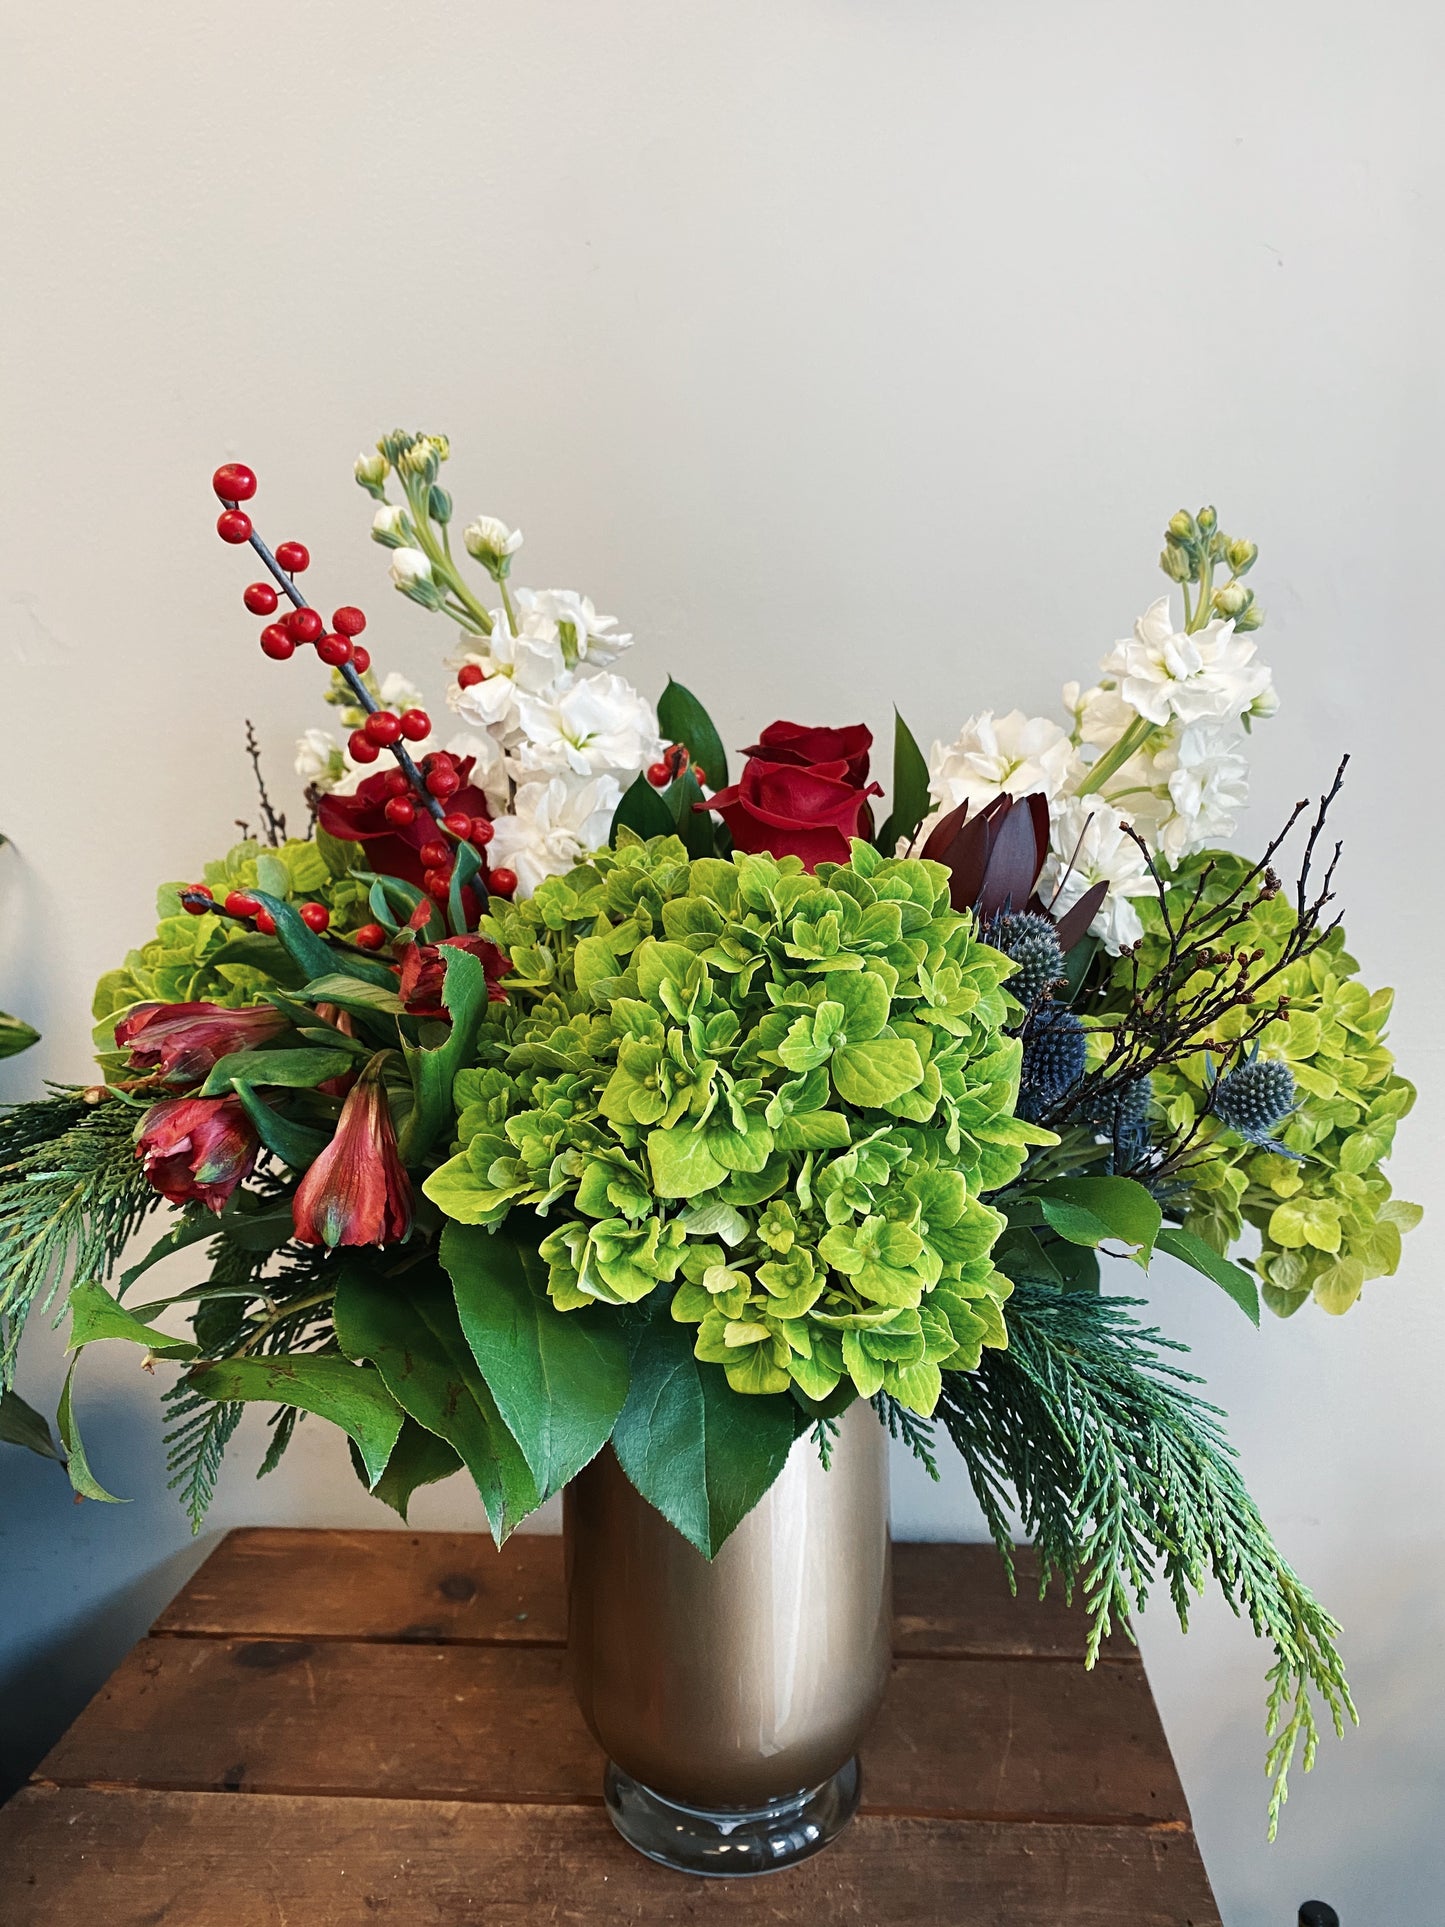 Made with Love - Christmas and Holiday Vase Arrangement (Assorted Sizes)